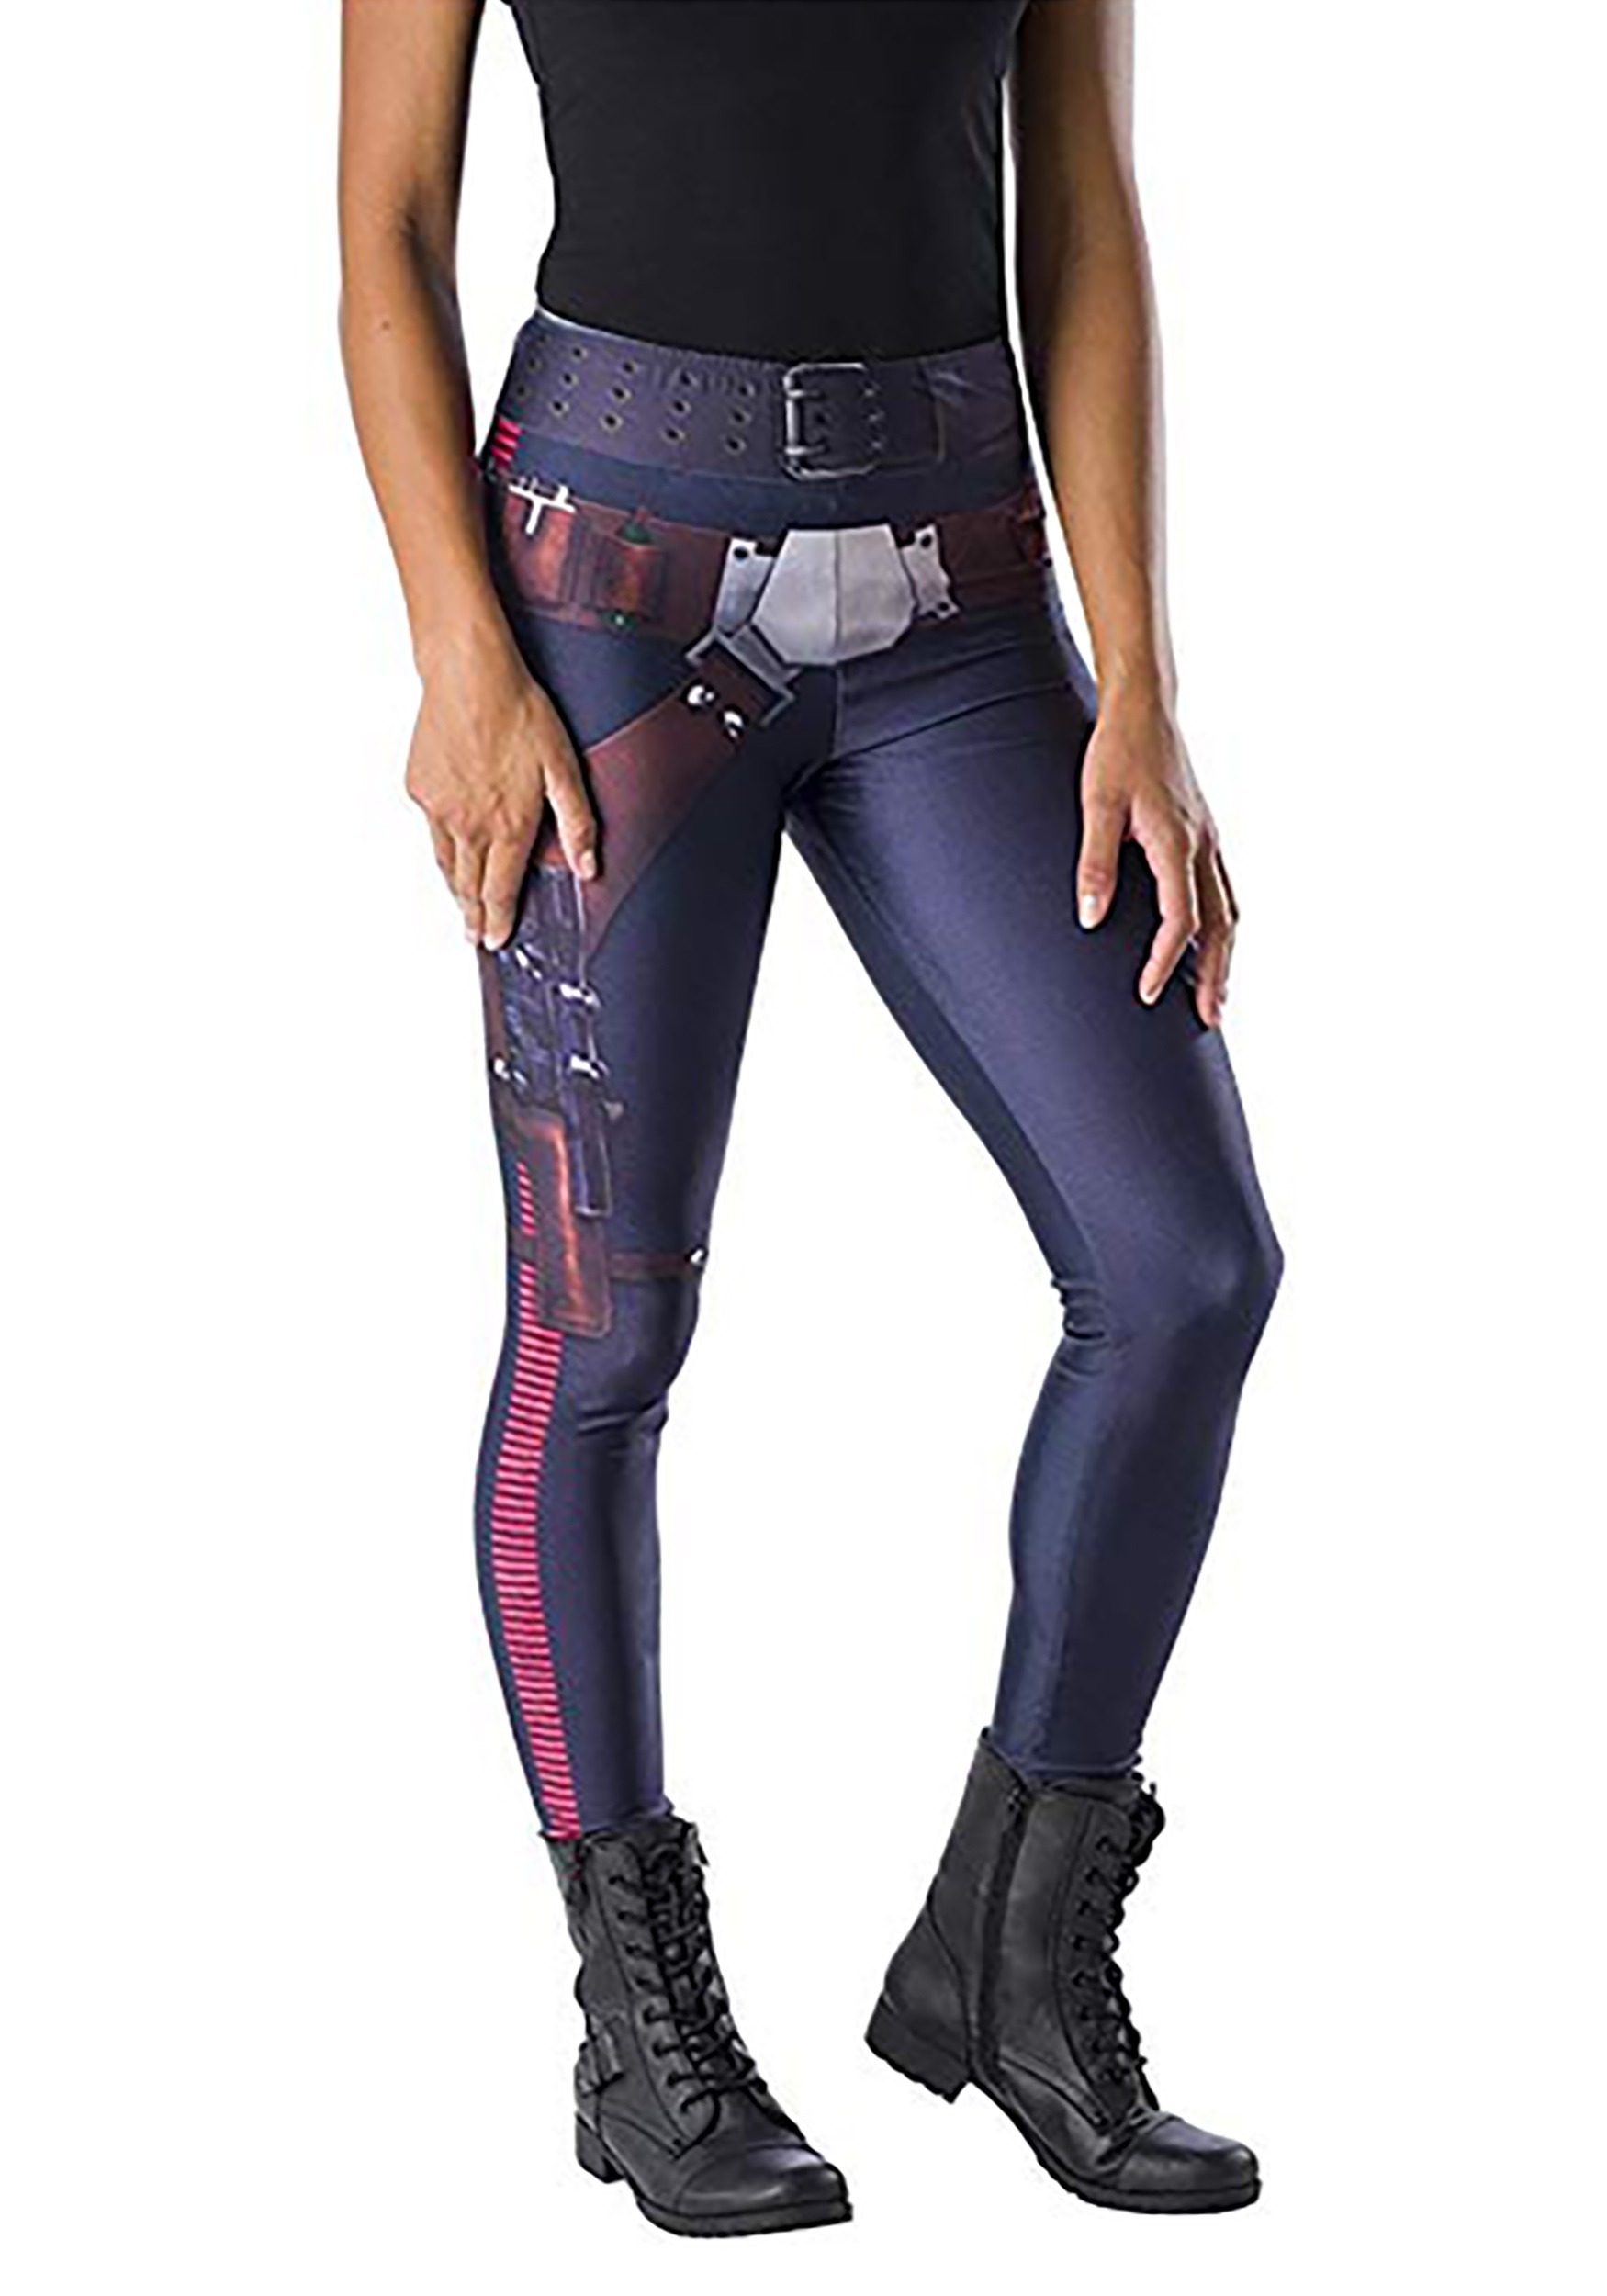 Are Zyia Leggings Squat Proof Research